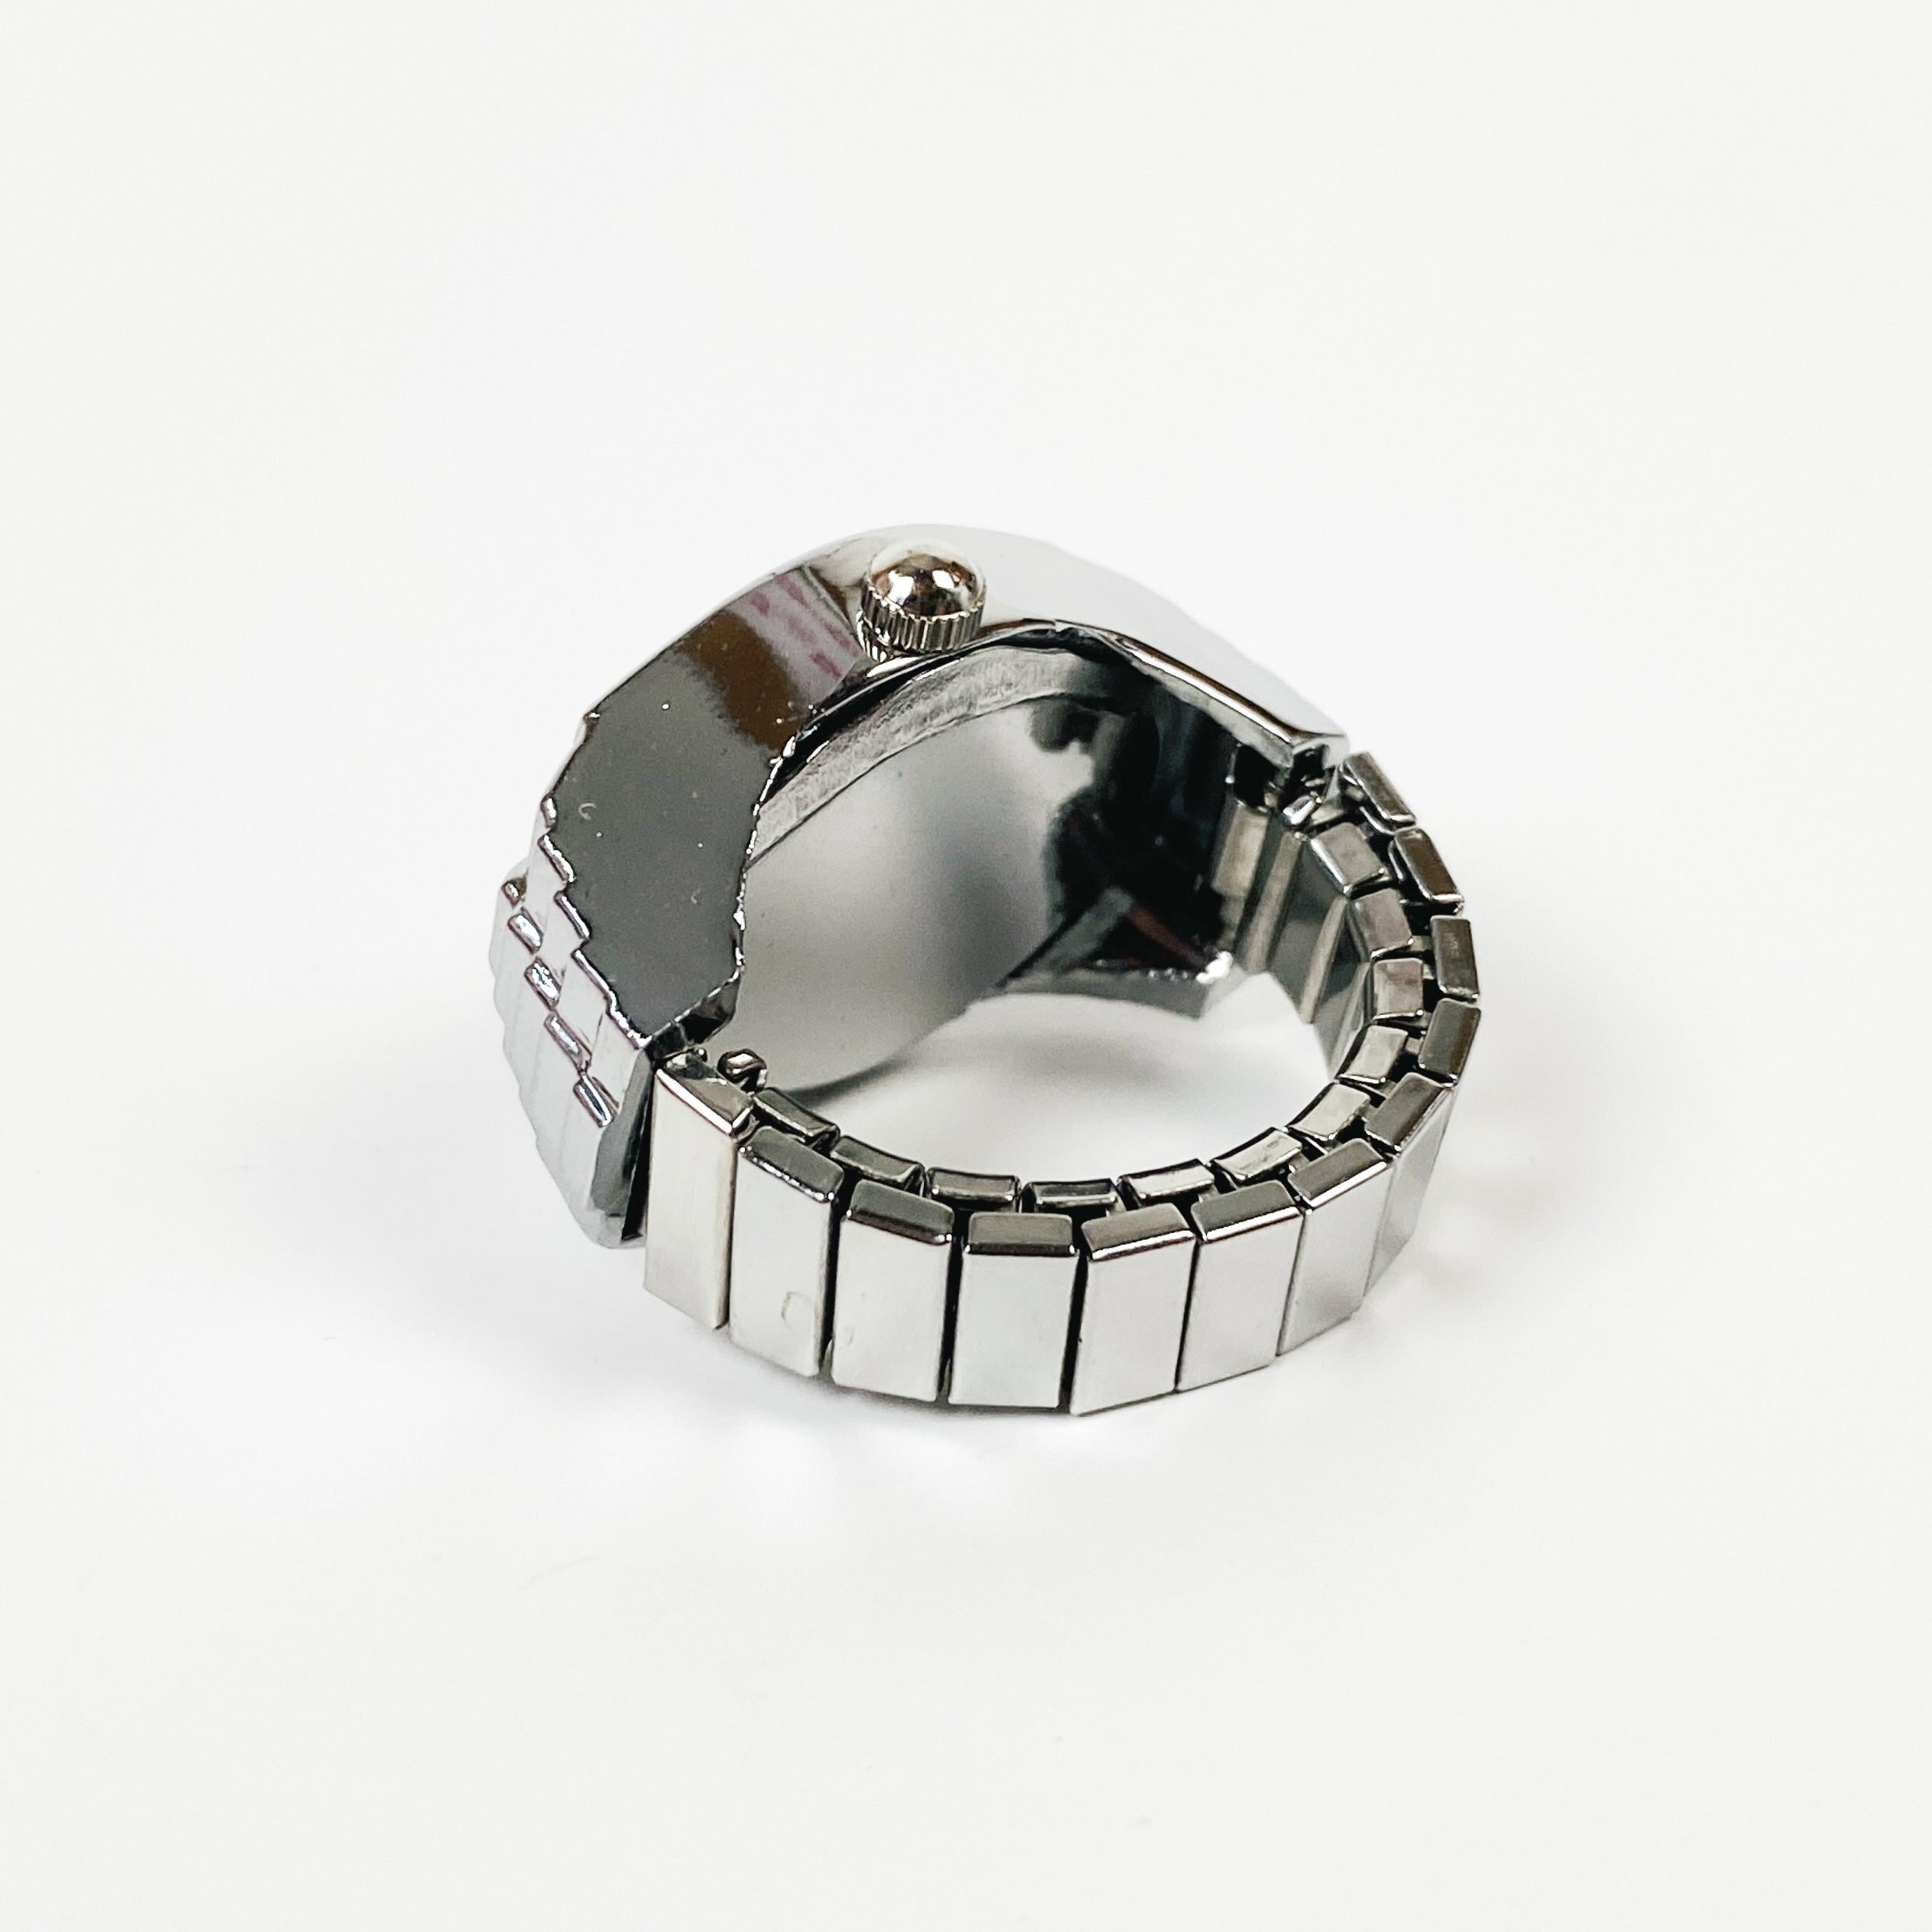 Retro Adjustable Watch Ring Silver White Blue